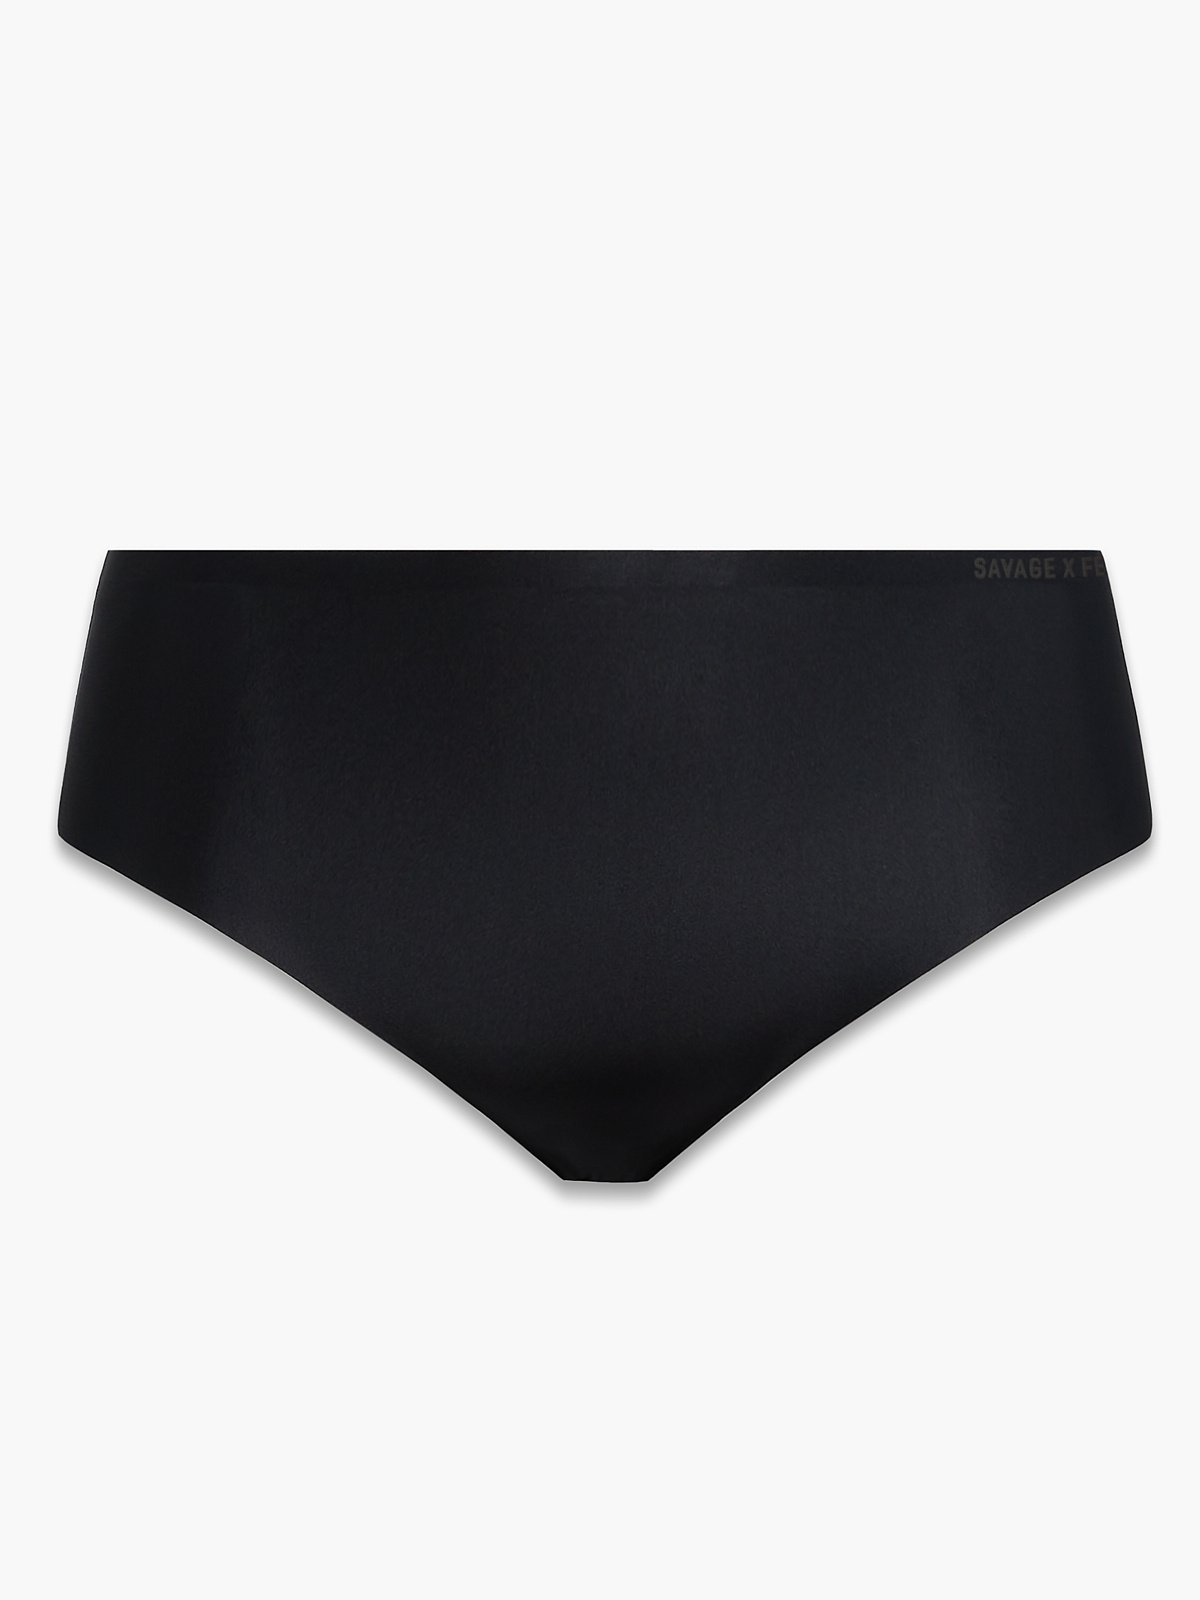 https://cdn.savagex.com/media/images/products/UD2356829-0687/MICROFIBER-NO-SHOW-HIPSTER-PANTY-UD2356829-0687-LAYDOWN-1200x1600.jpg